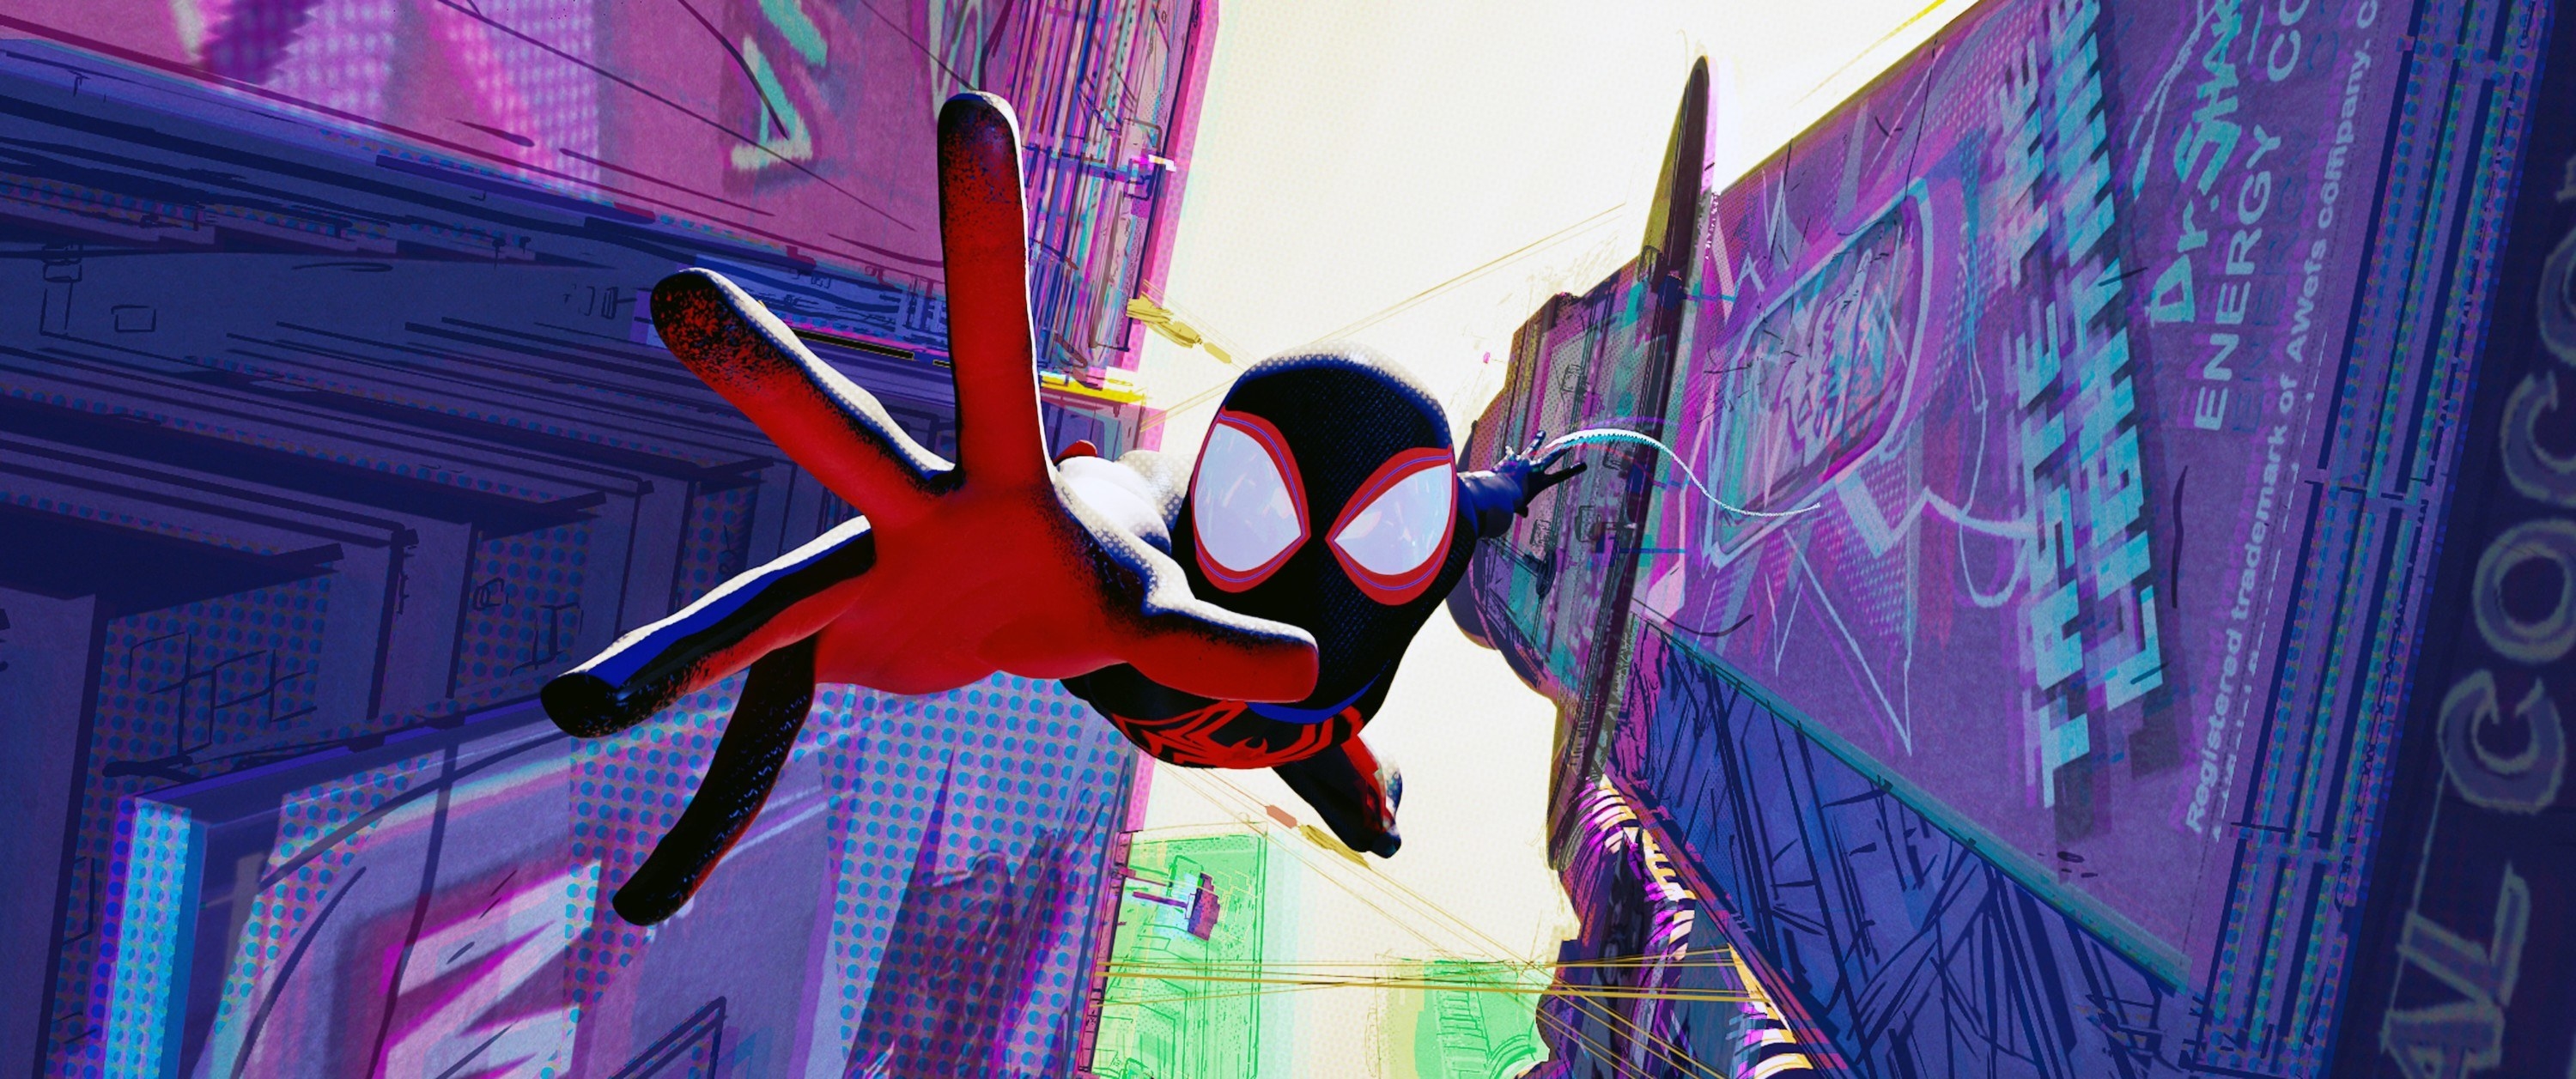 Spider-Man swinging through the streets in Spider-Man: Into the Spider-Verse